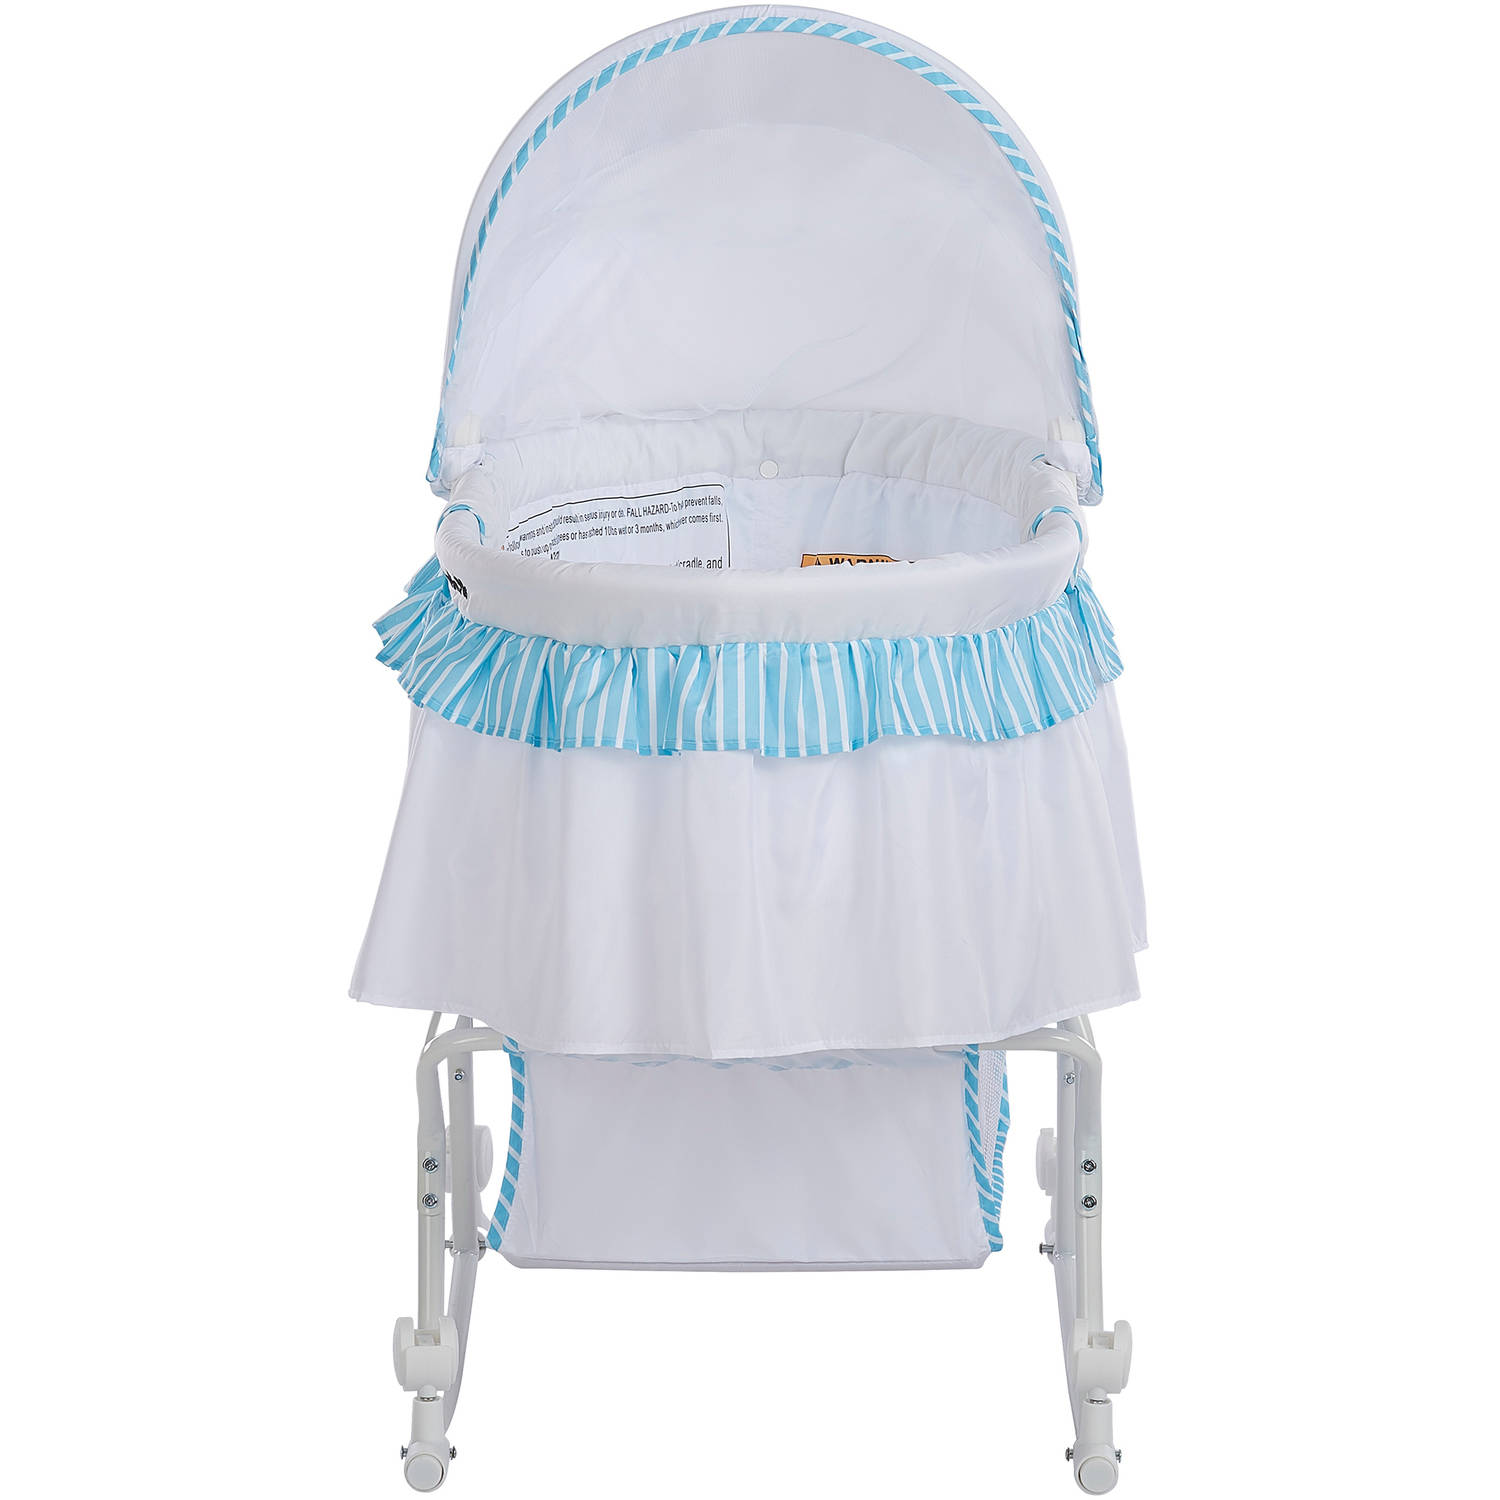 Dream On Me Lacy Portable 2-in-1 Bassinet & Cradle in Blue and White, Lightweight Baby Bassinet - image 5 of 6